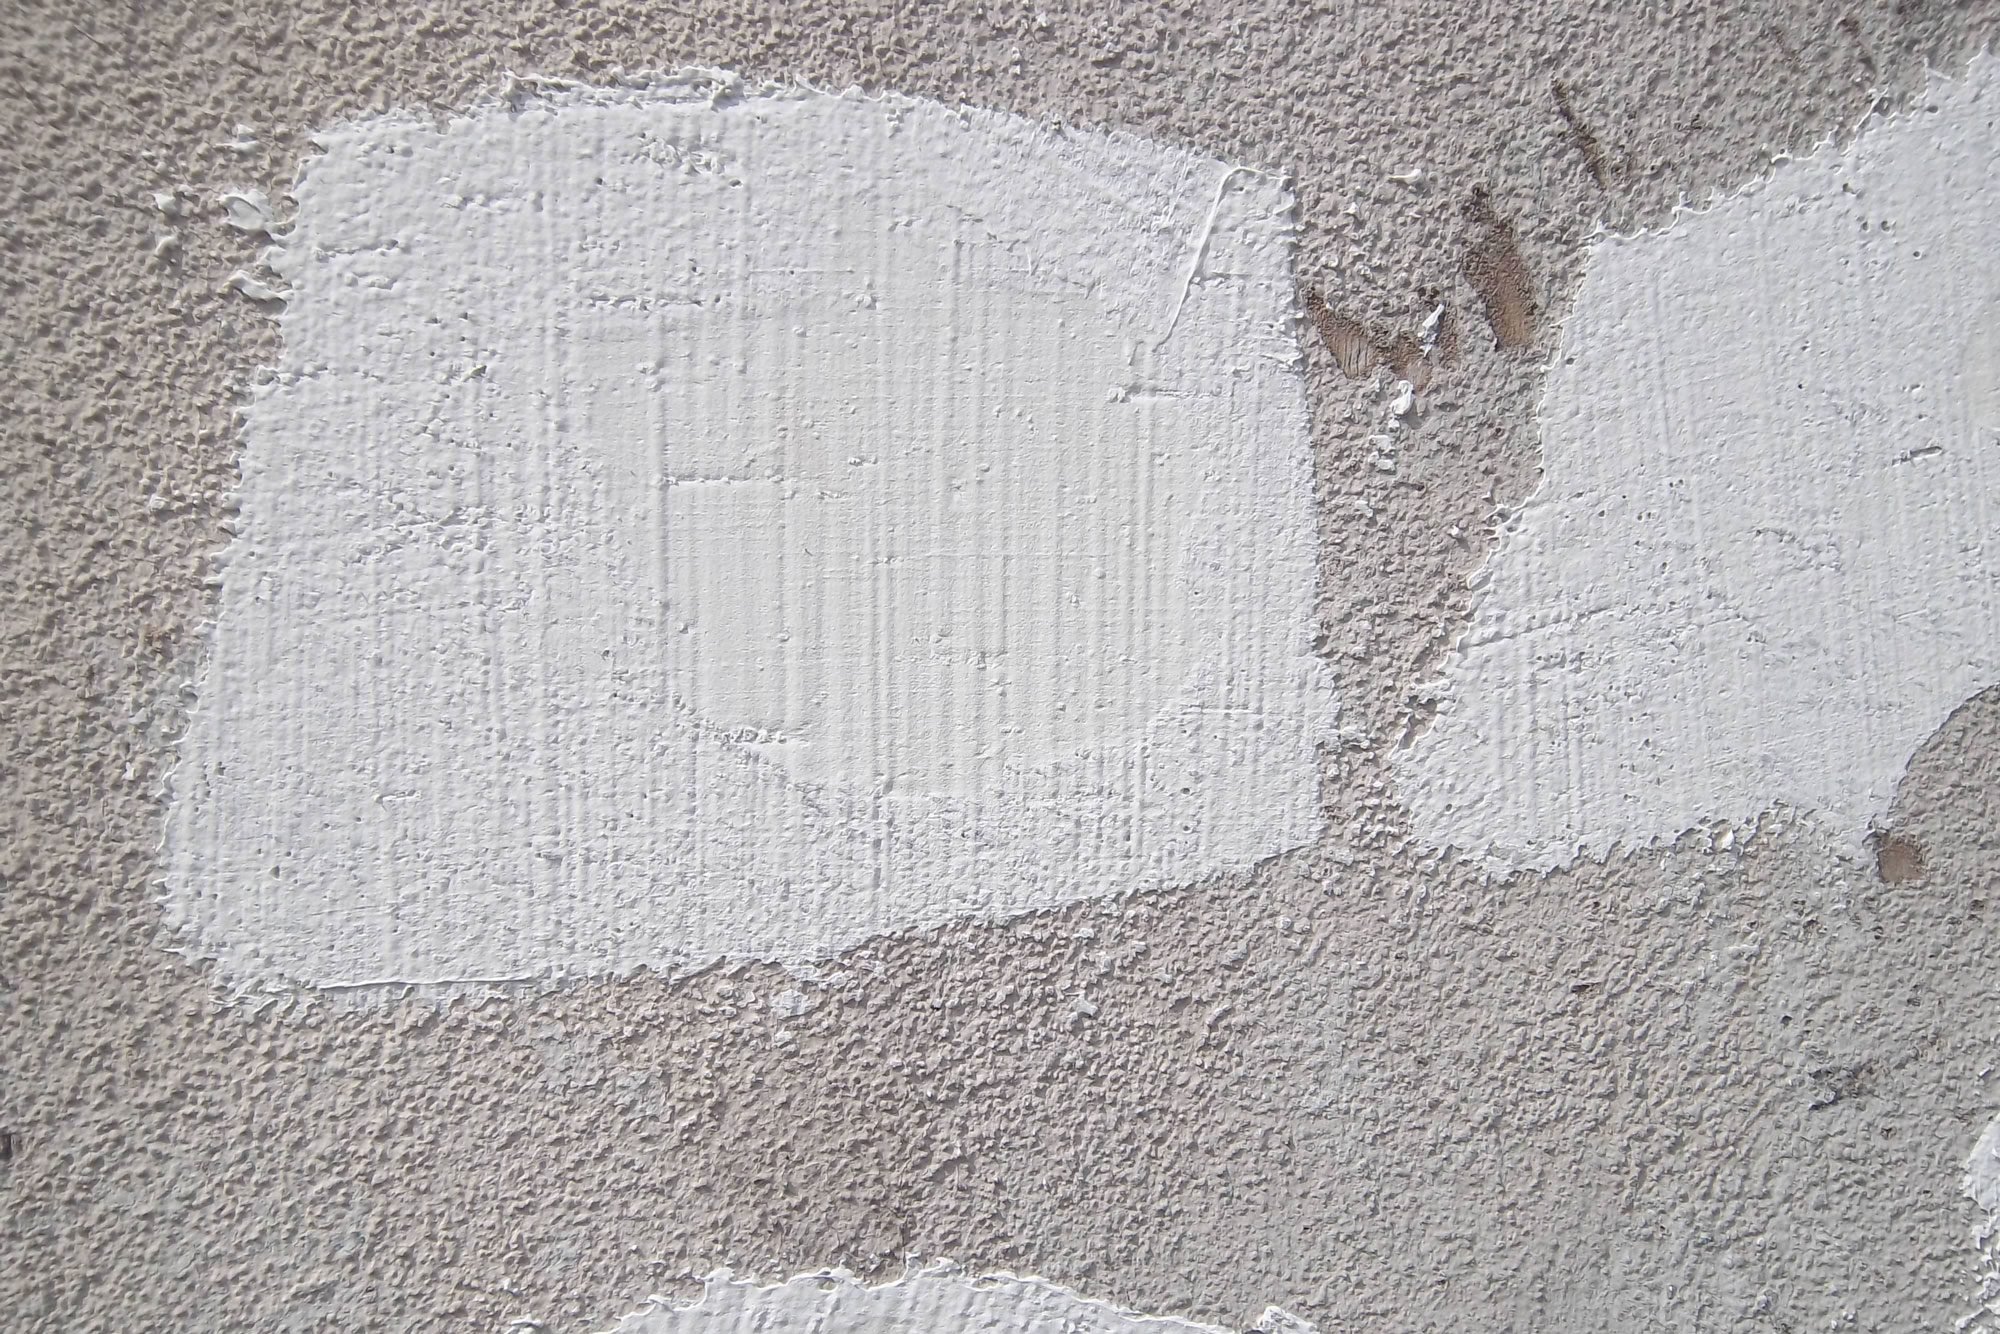 Patched Stucco Wall